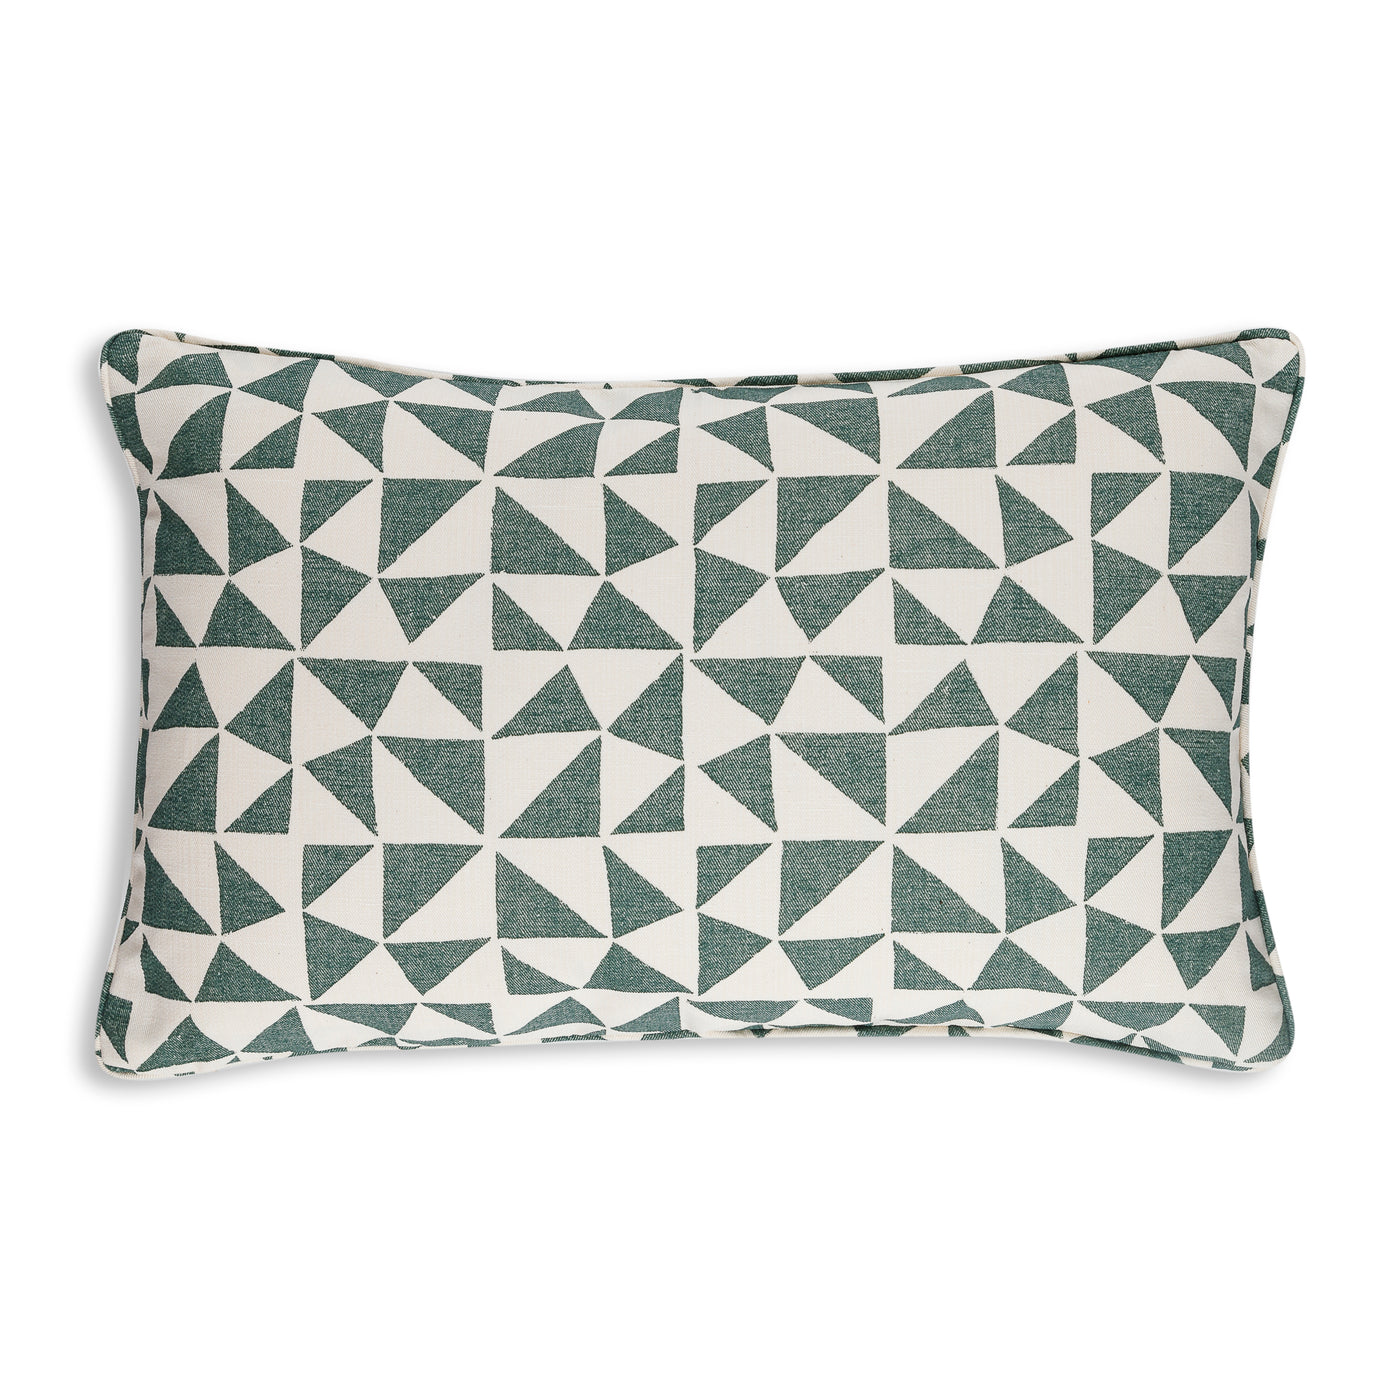 Green and White Oblong Fermoie Pillow